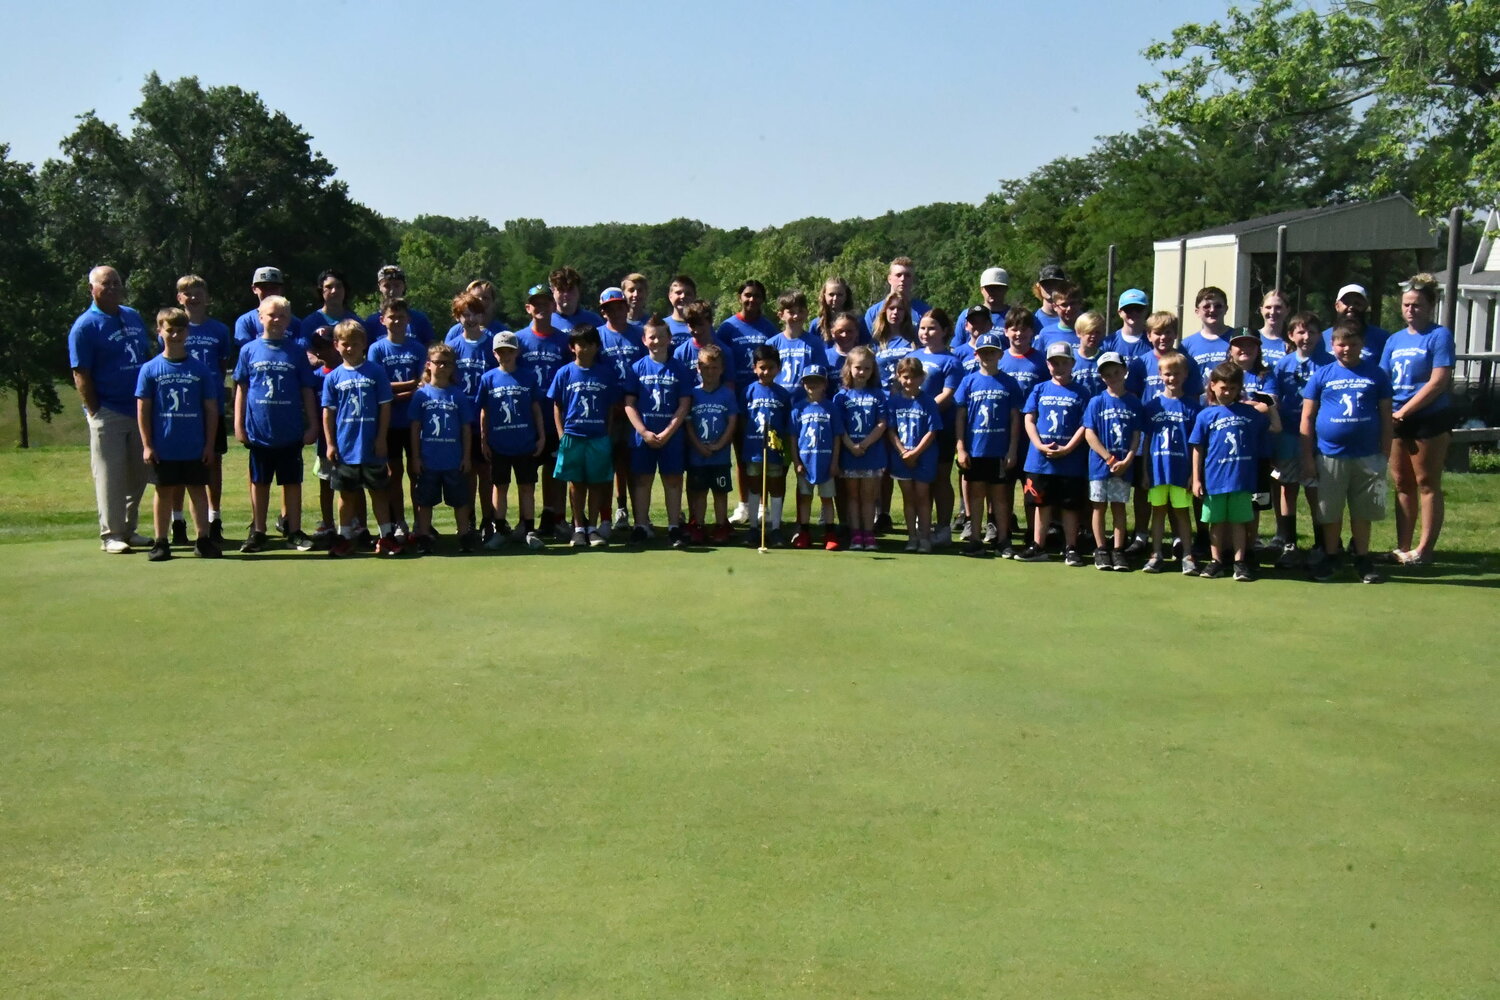 Here's the group shot from the Moberly junior golf clinic conducted from May 30-June 2 at Heritage Hills Golf Course.